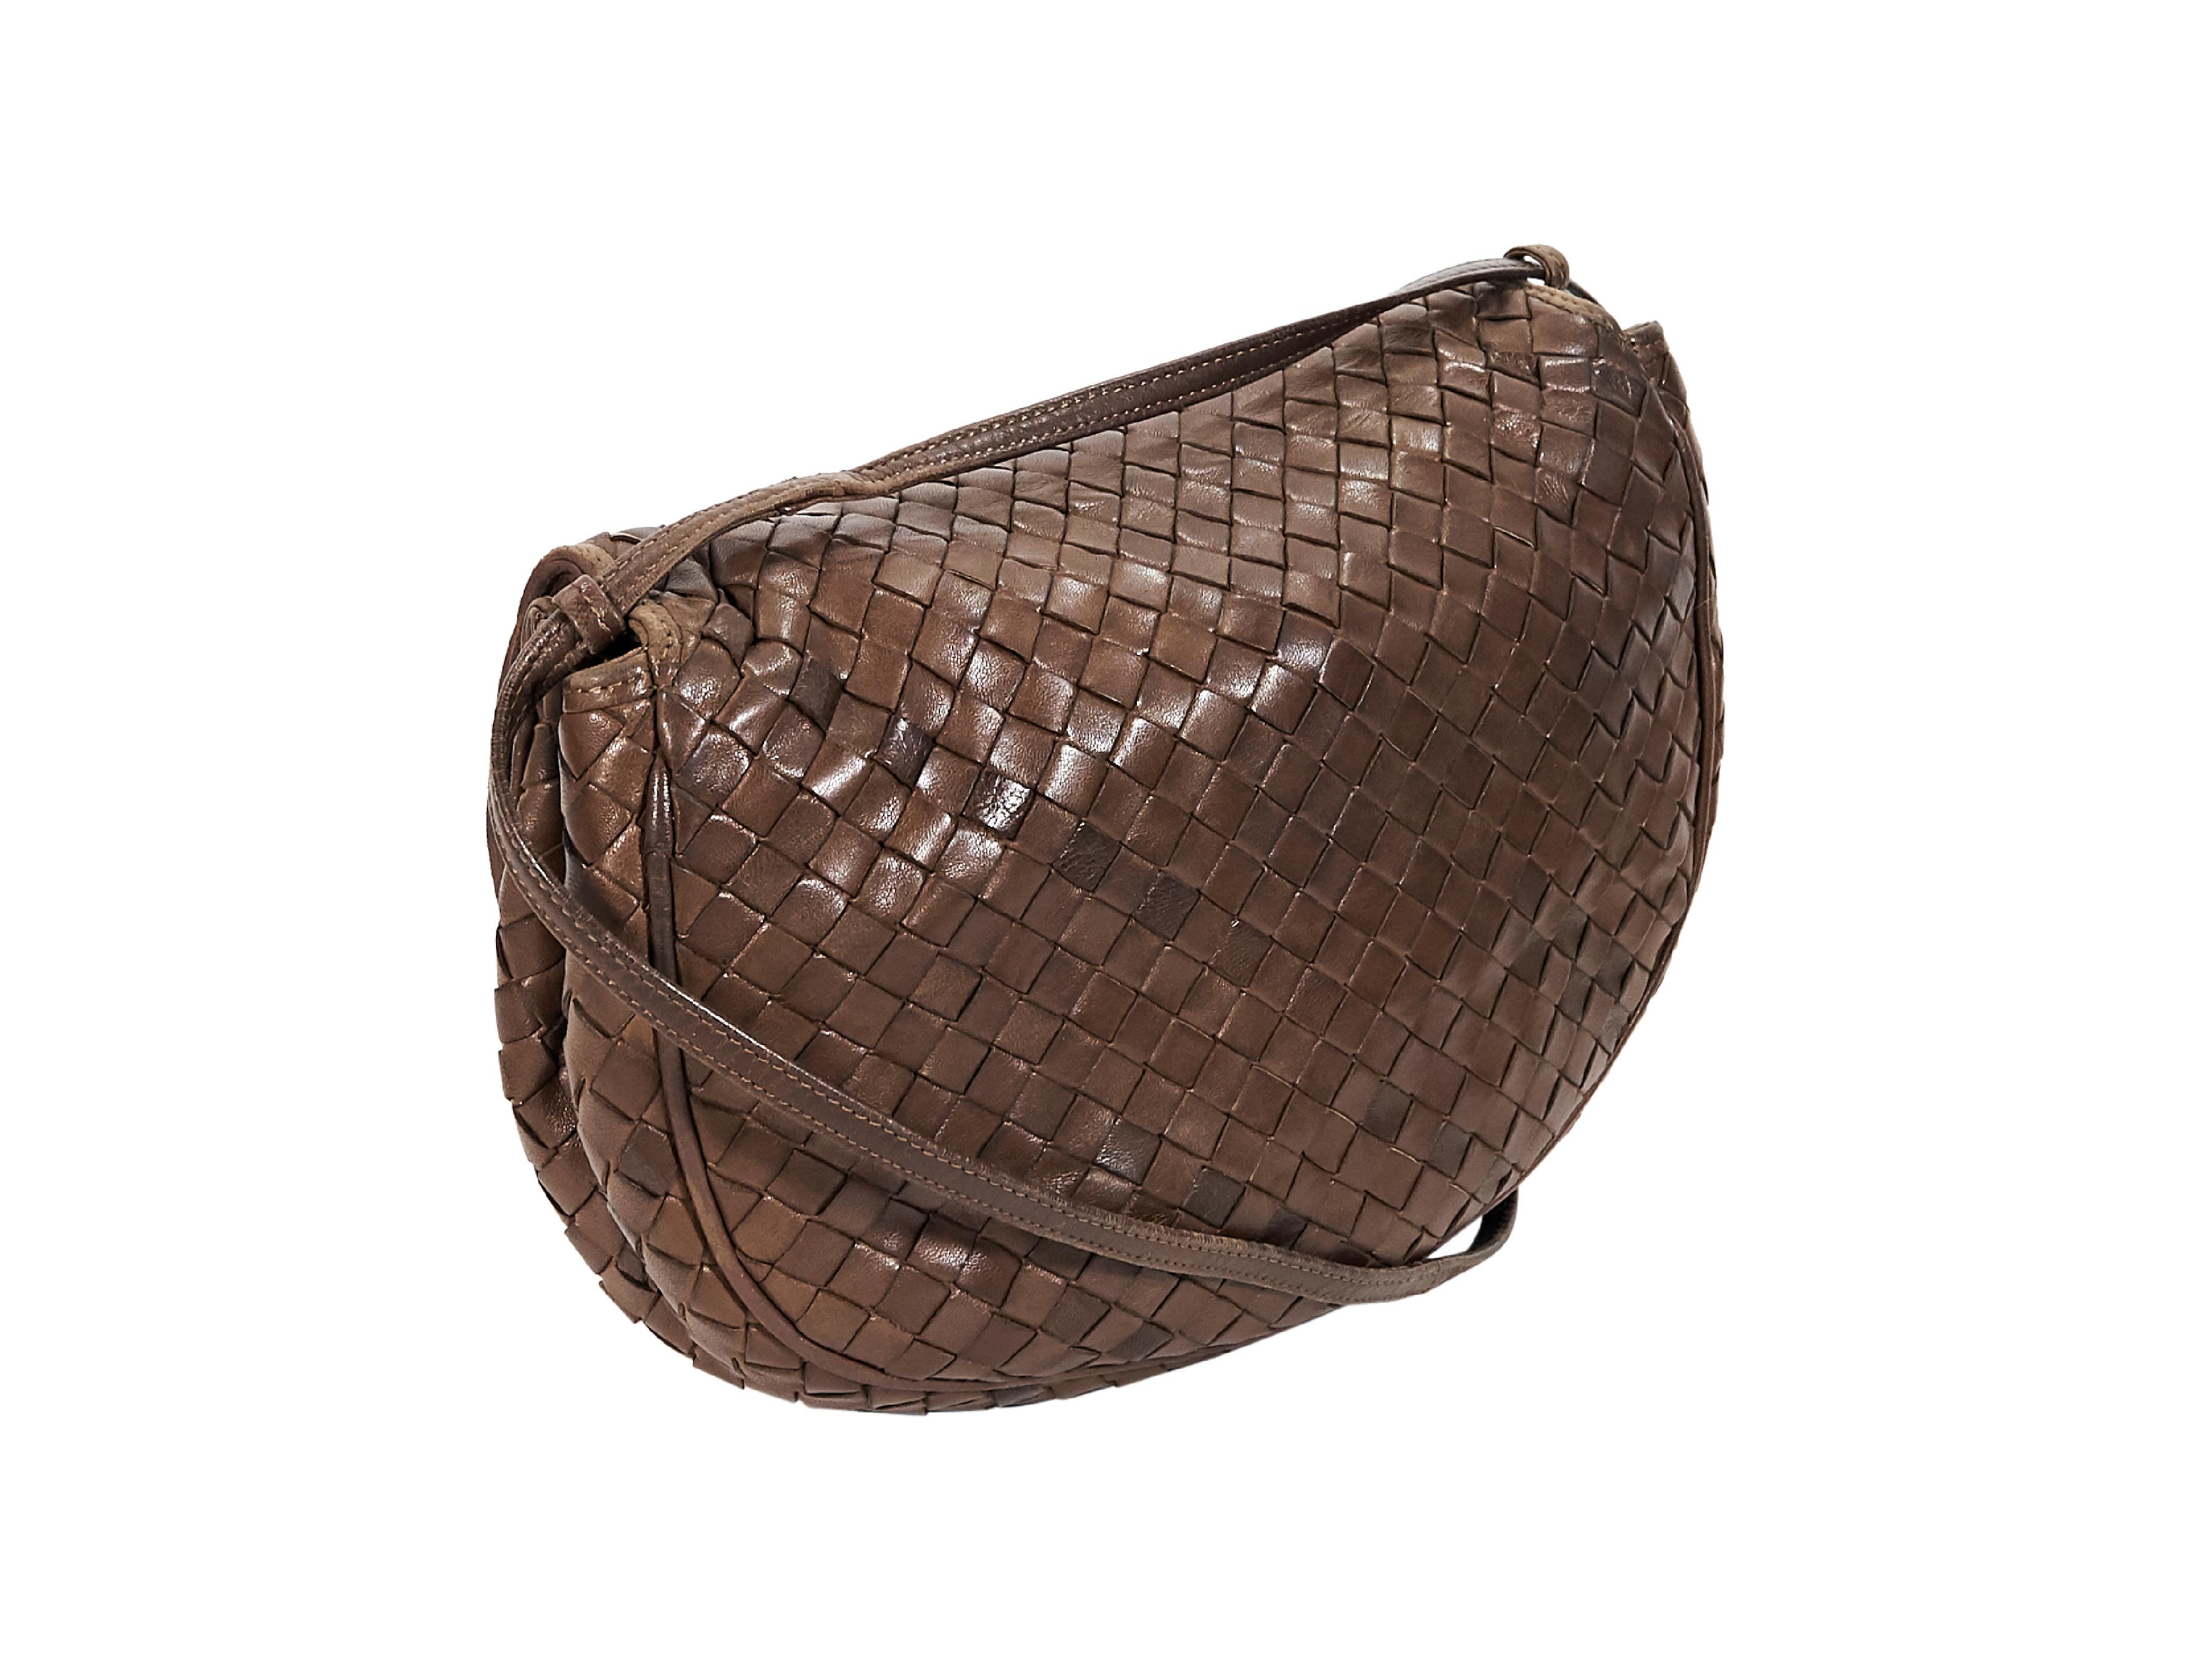 Product details:  Brown woven leather crossbody bag by Bottega Veneta.  Single crossbody strap.  Front flap accented with tassels.  Lined interior with inner zip pocket.  10